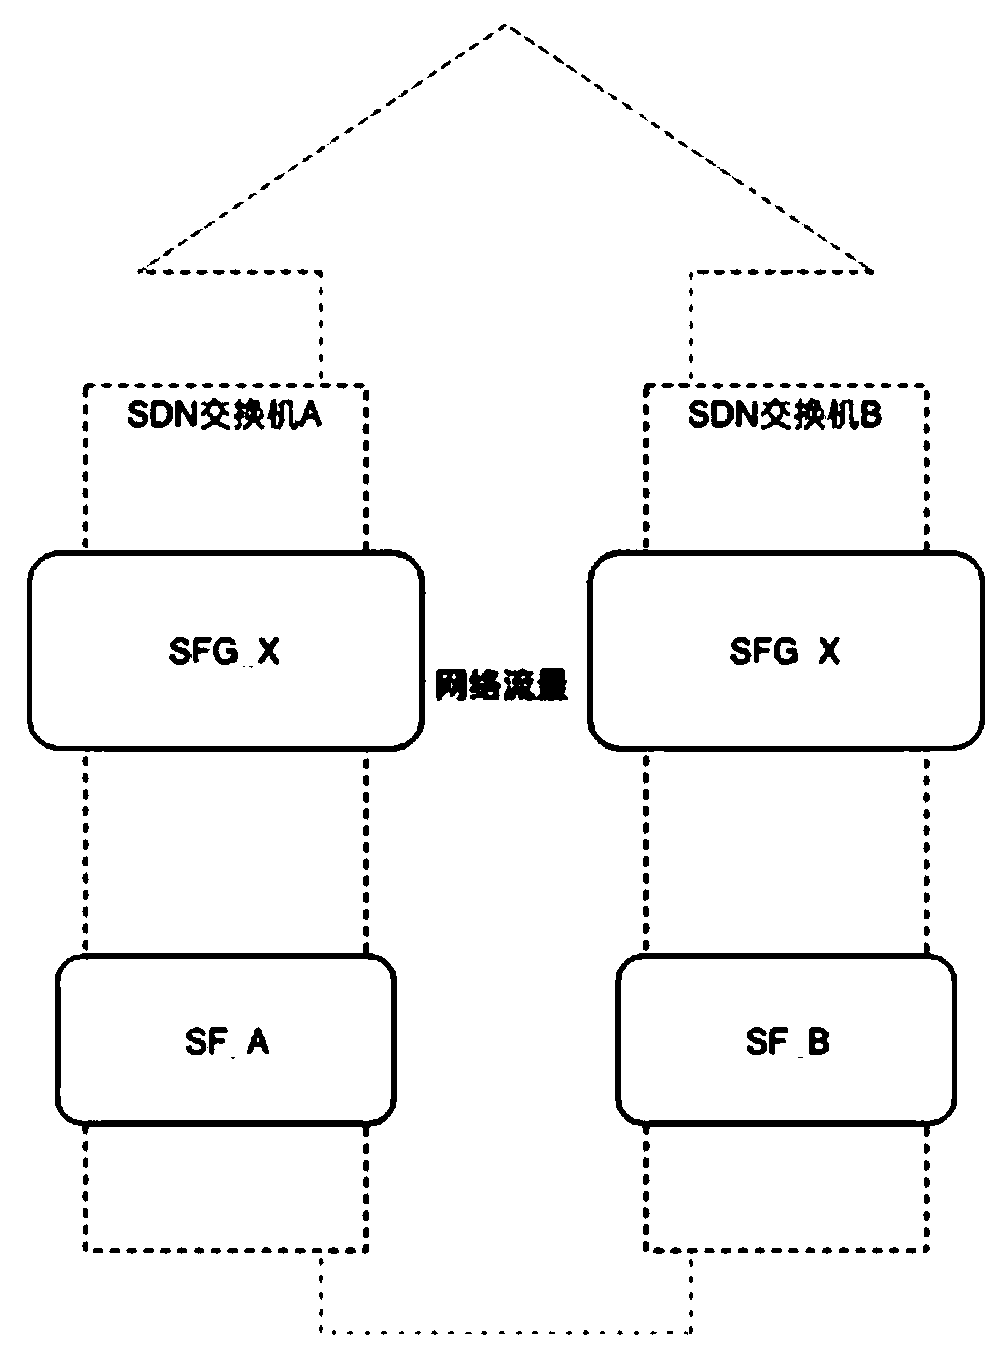 A service chain high-availability method applied to an SDN network